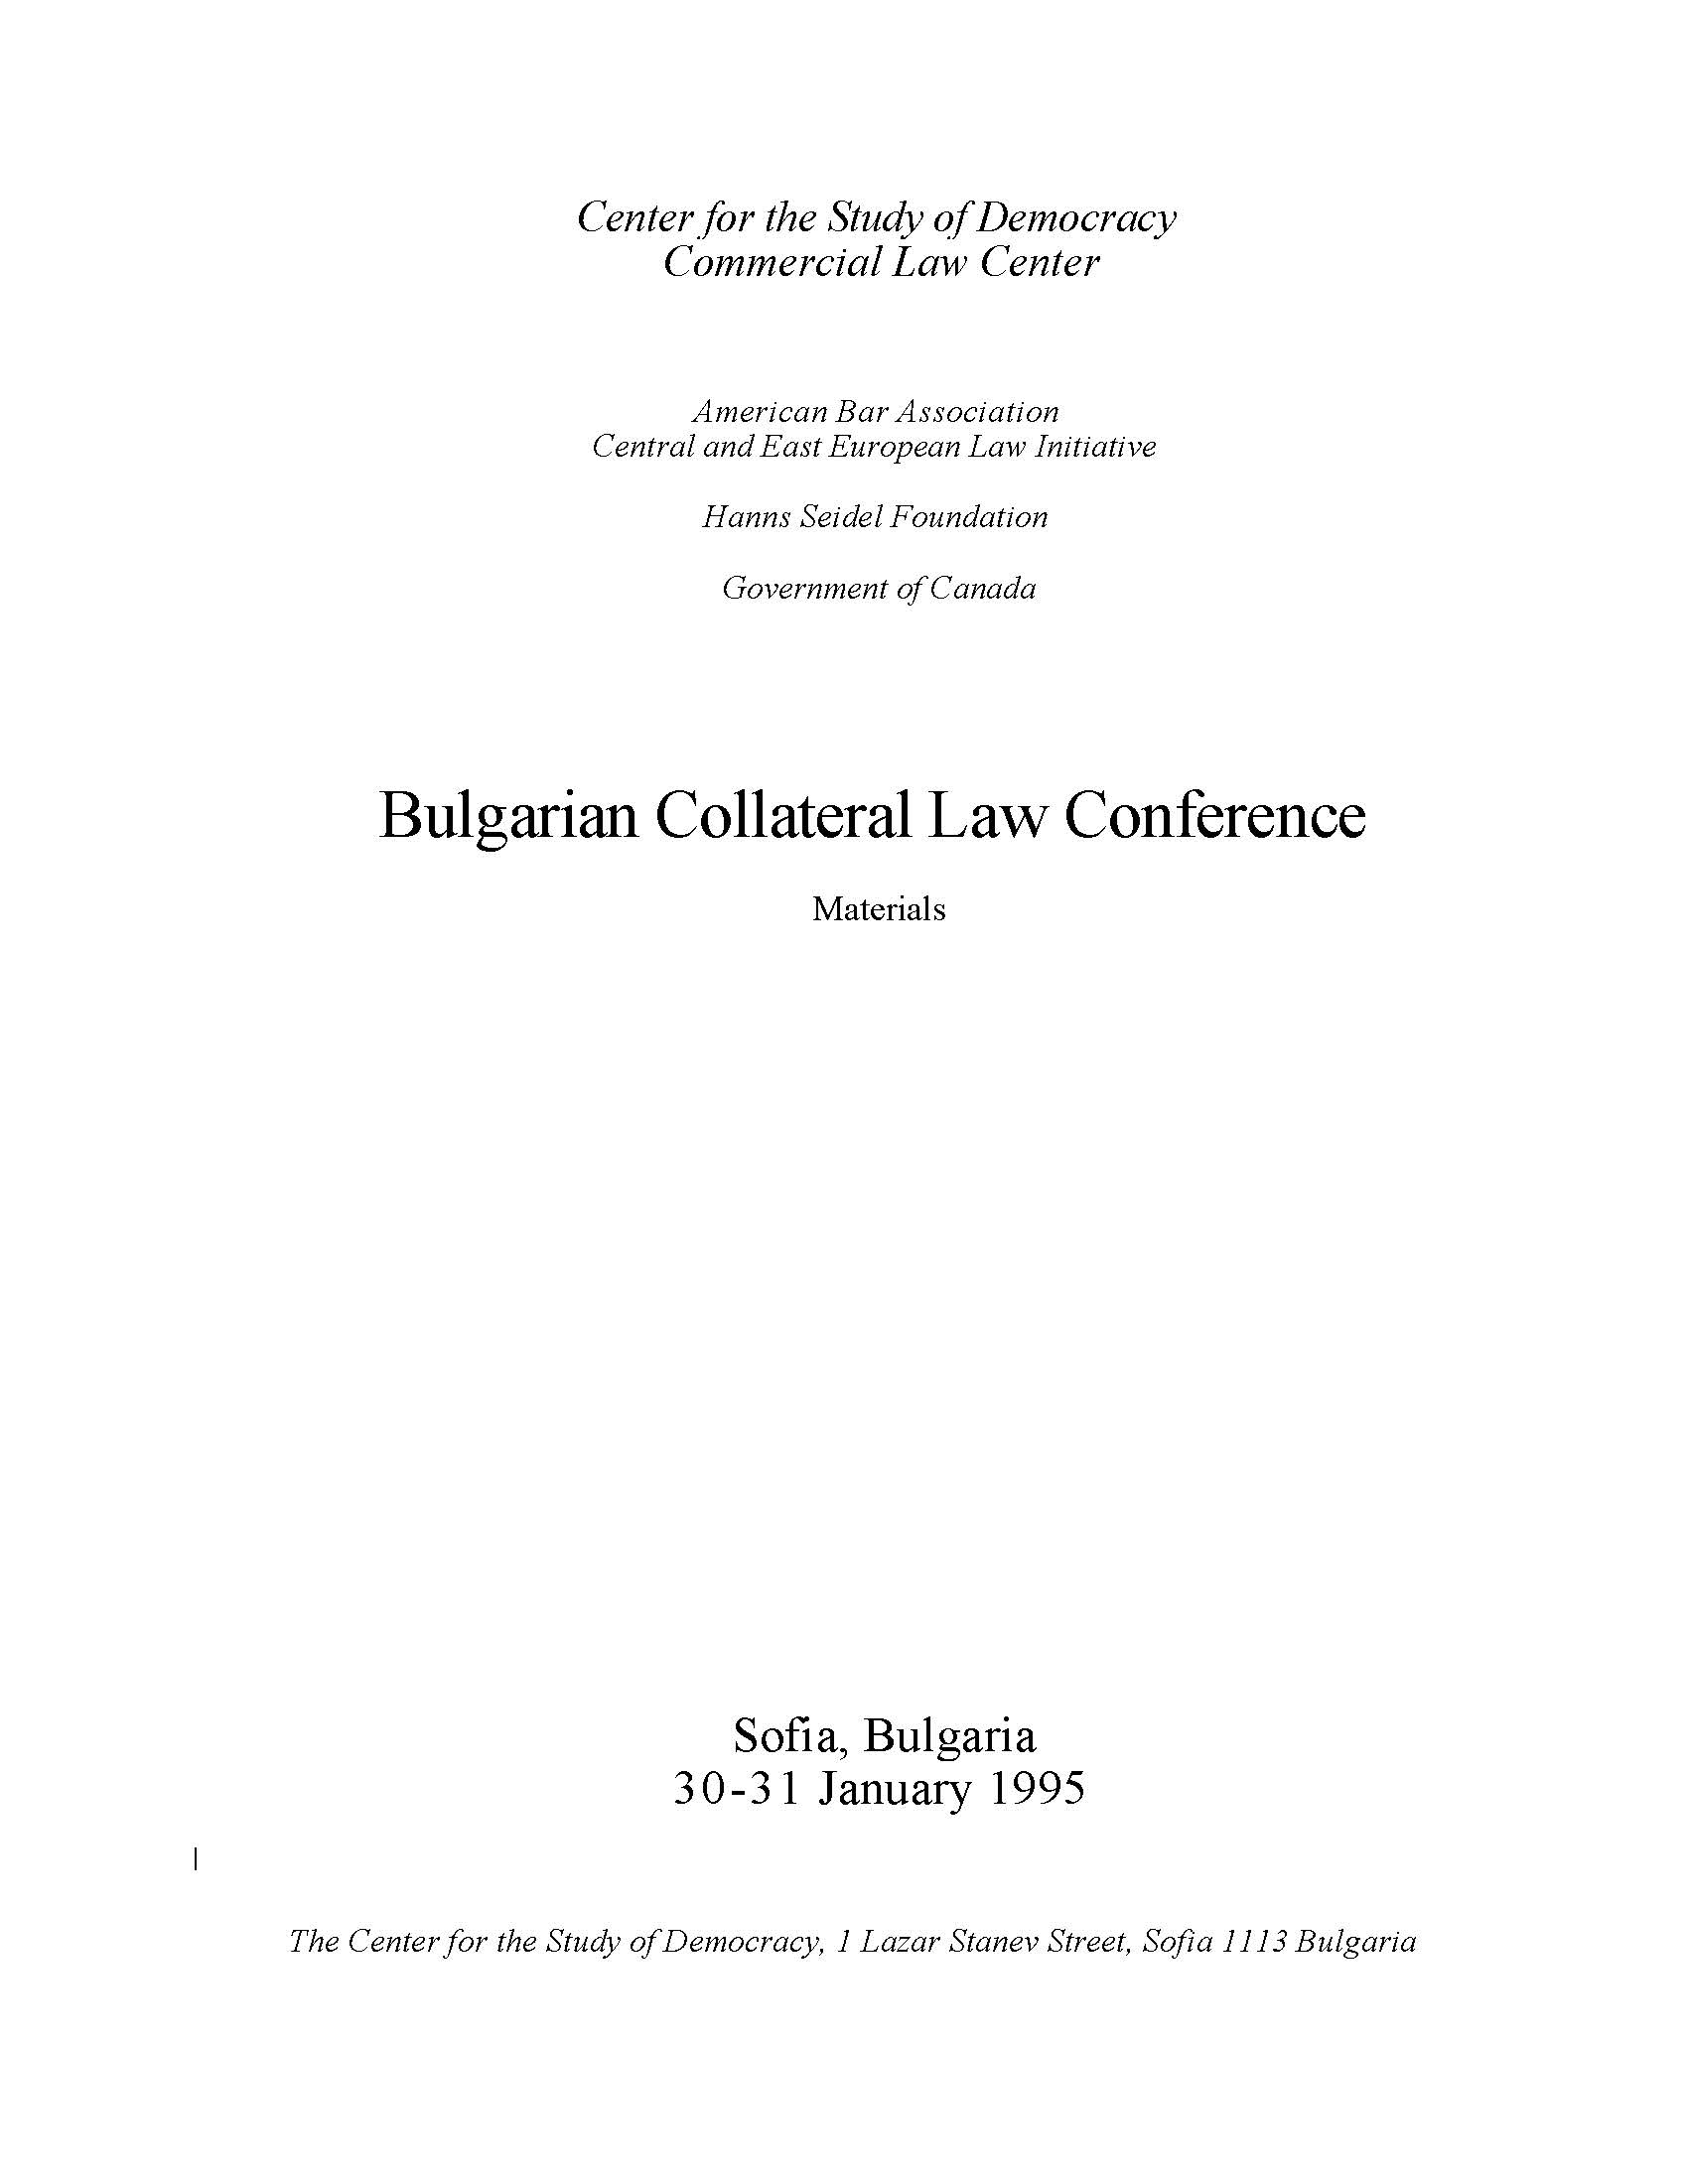 Materials from the Bulgarian Collateral Law Conference